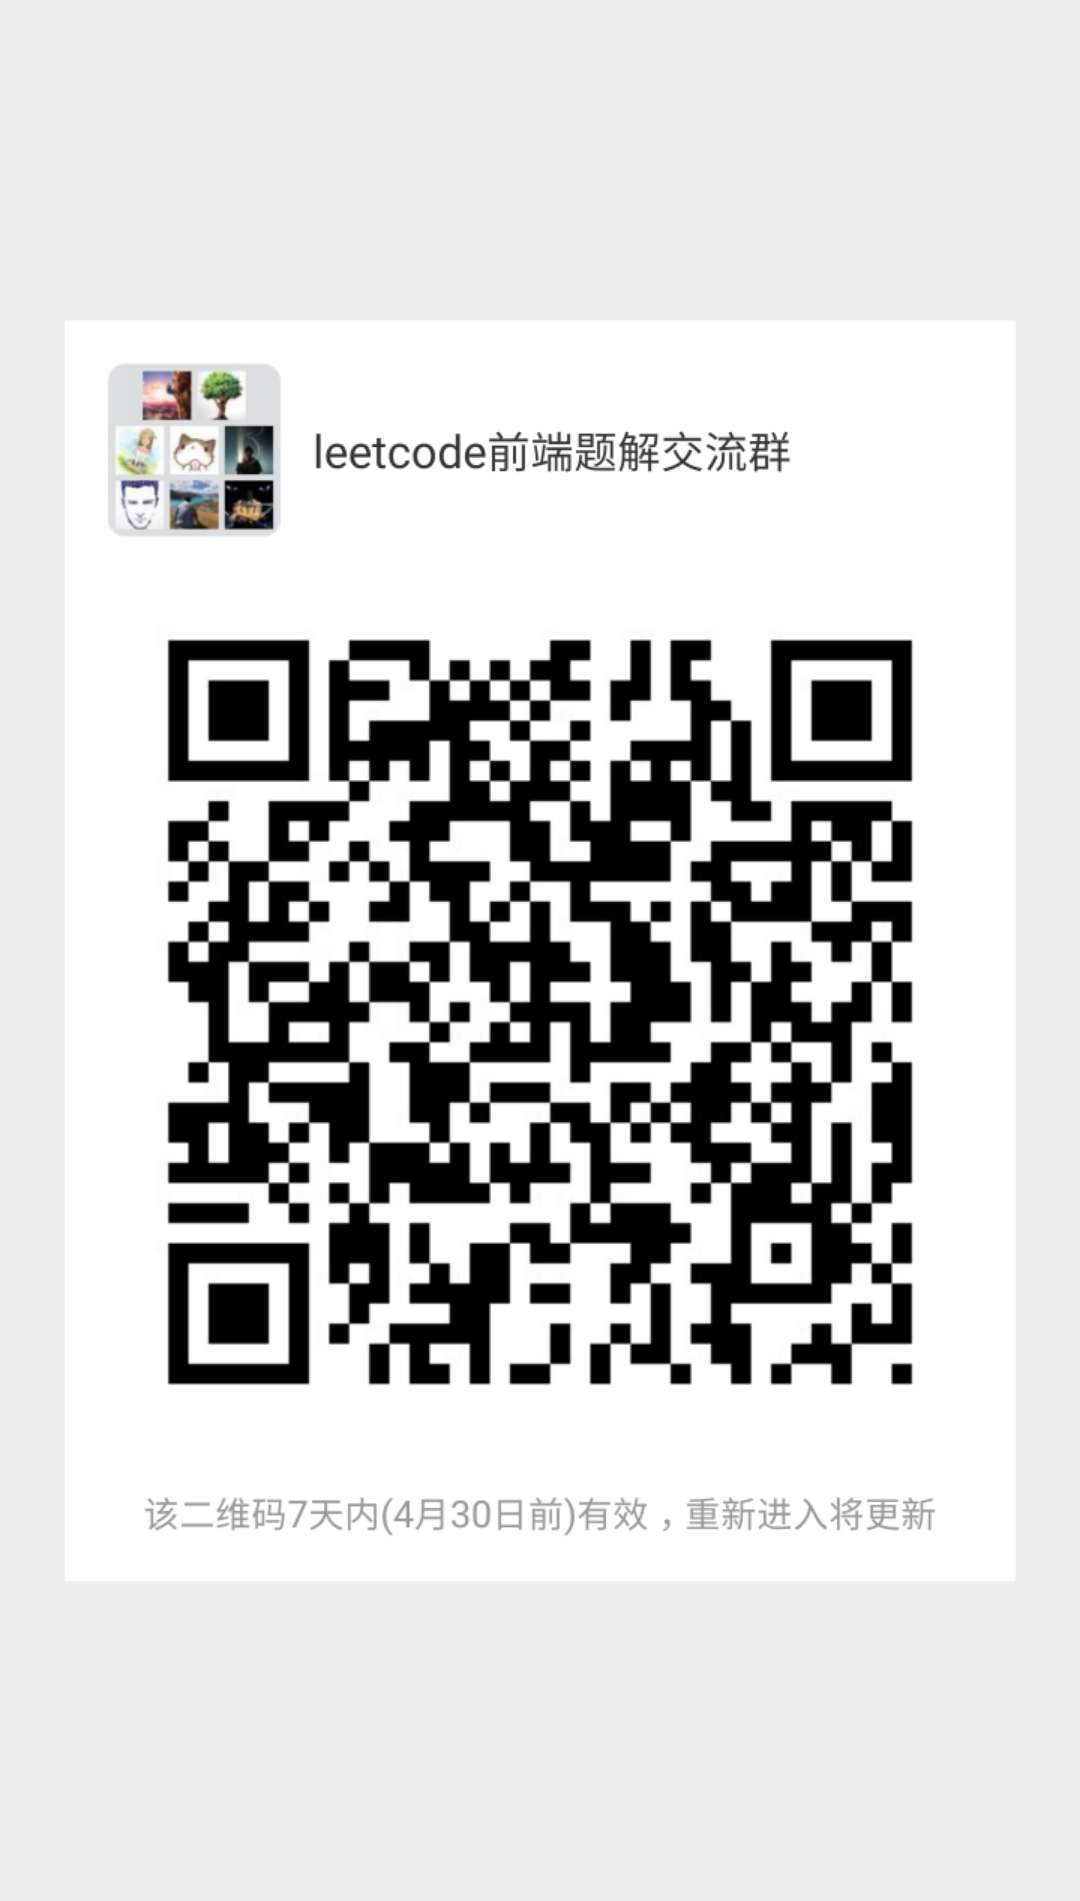 assets/wechat-group-chat.jpg